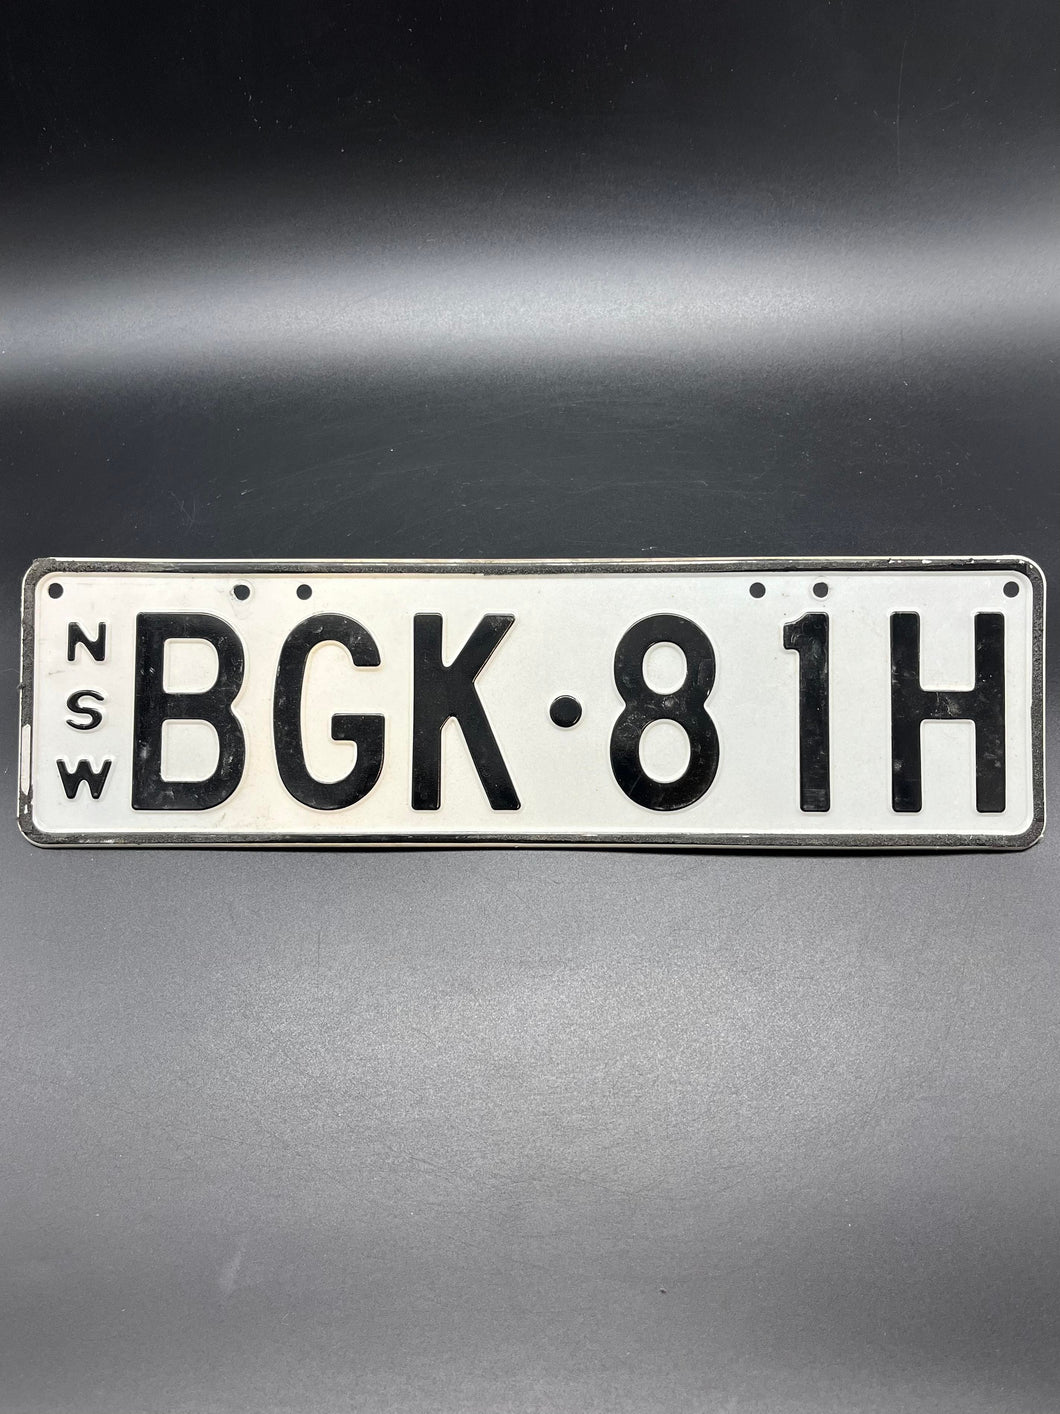 NSW Number Plate - BGK 81H